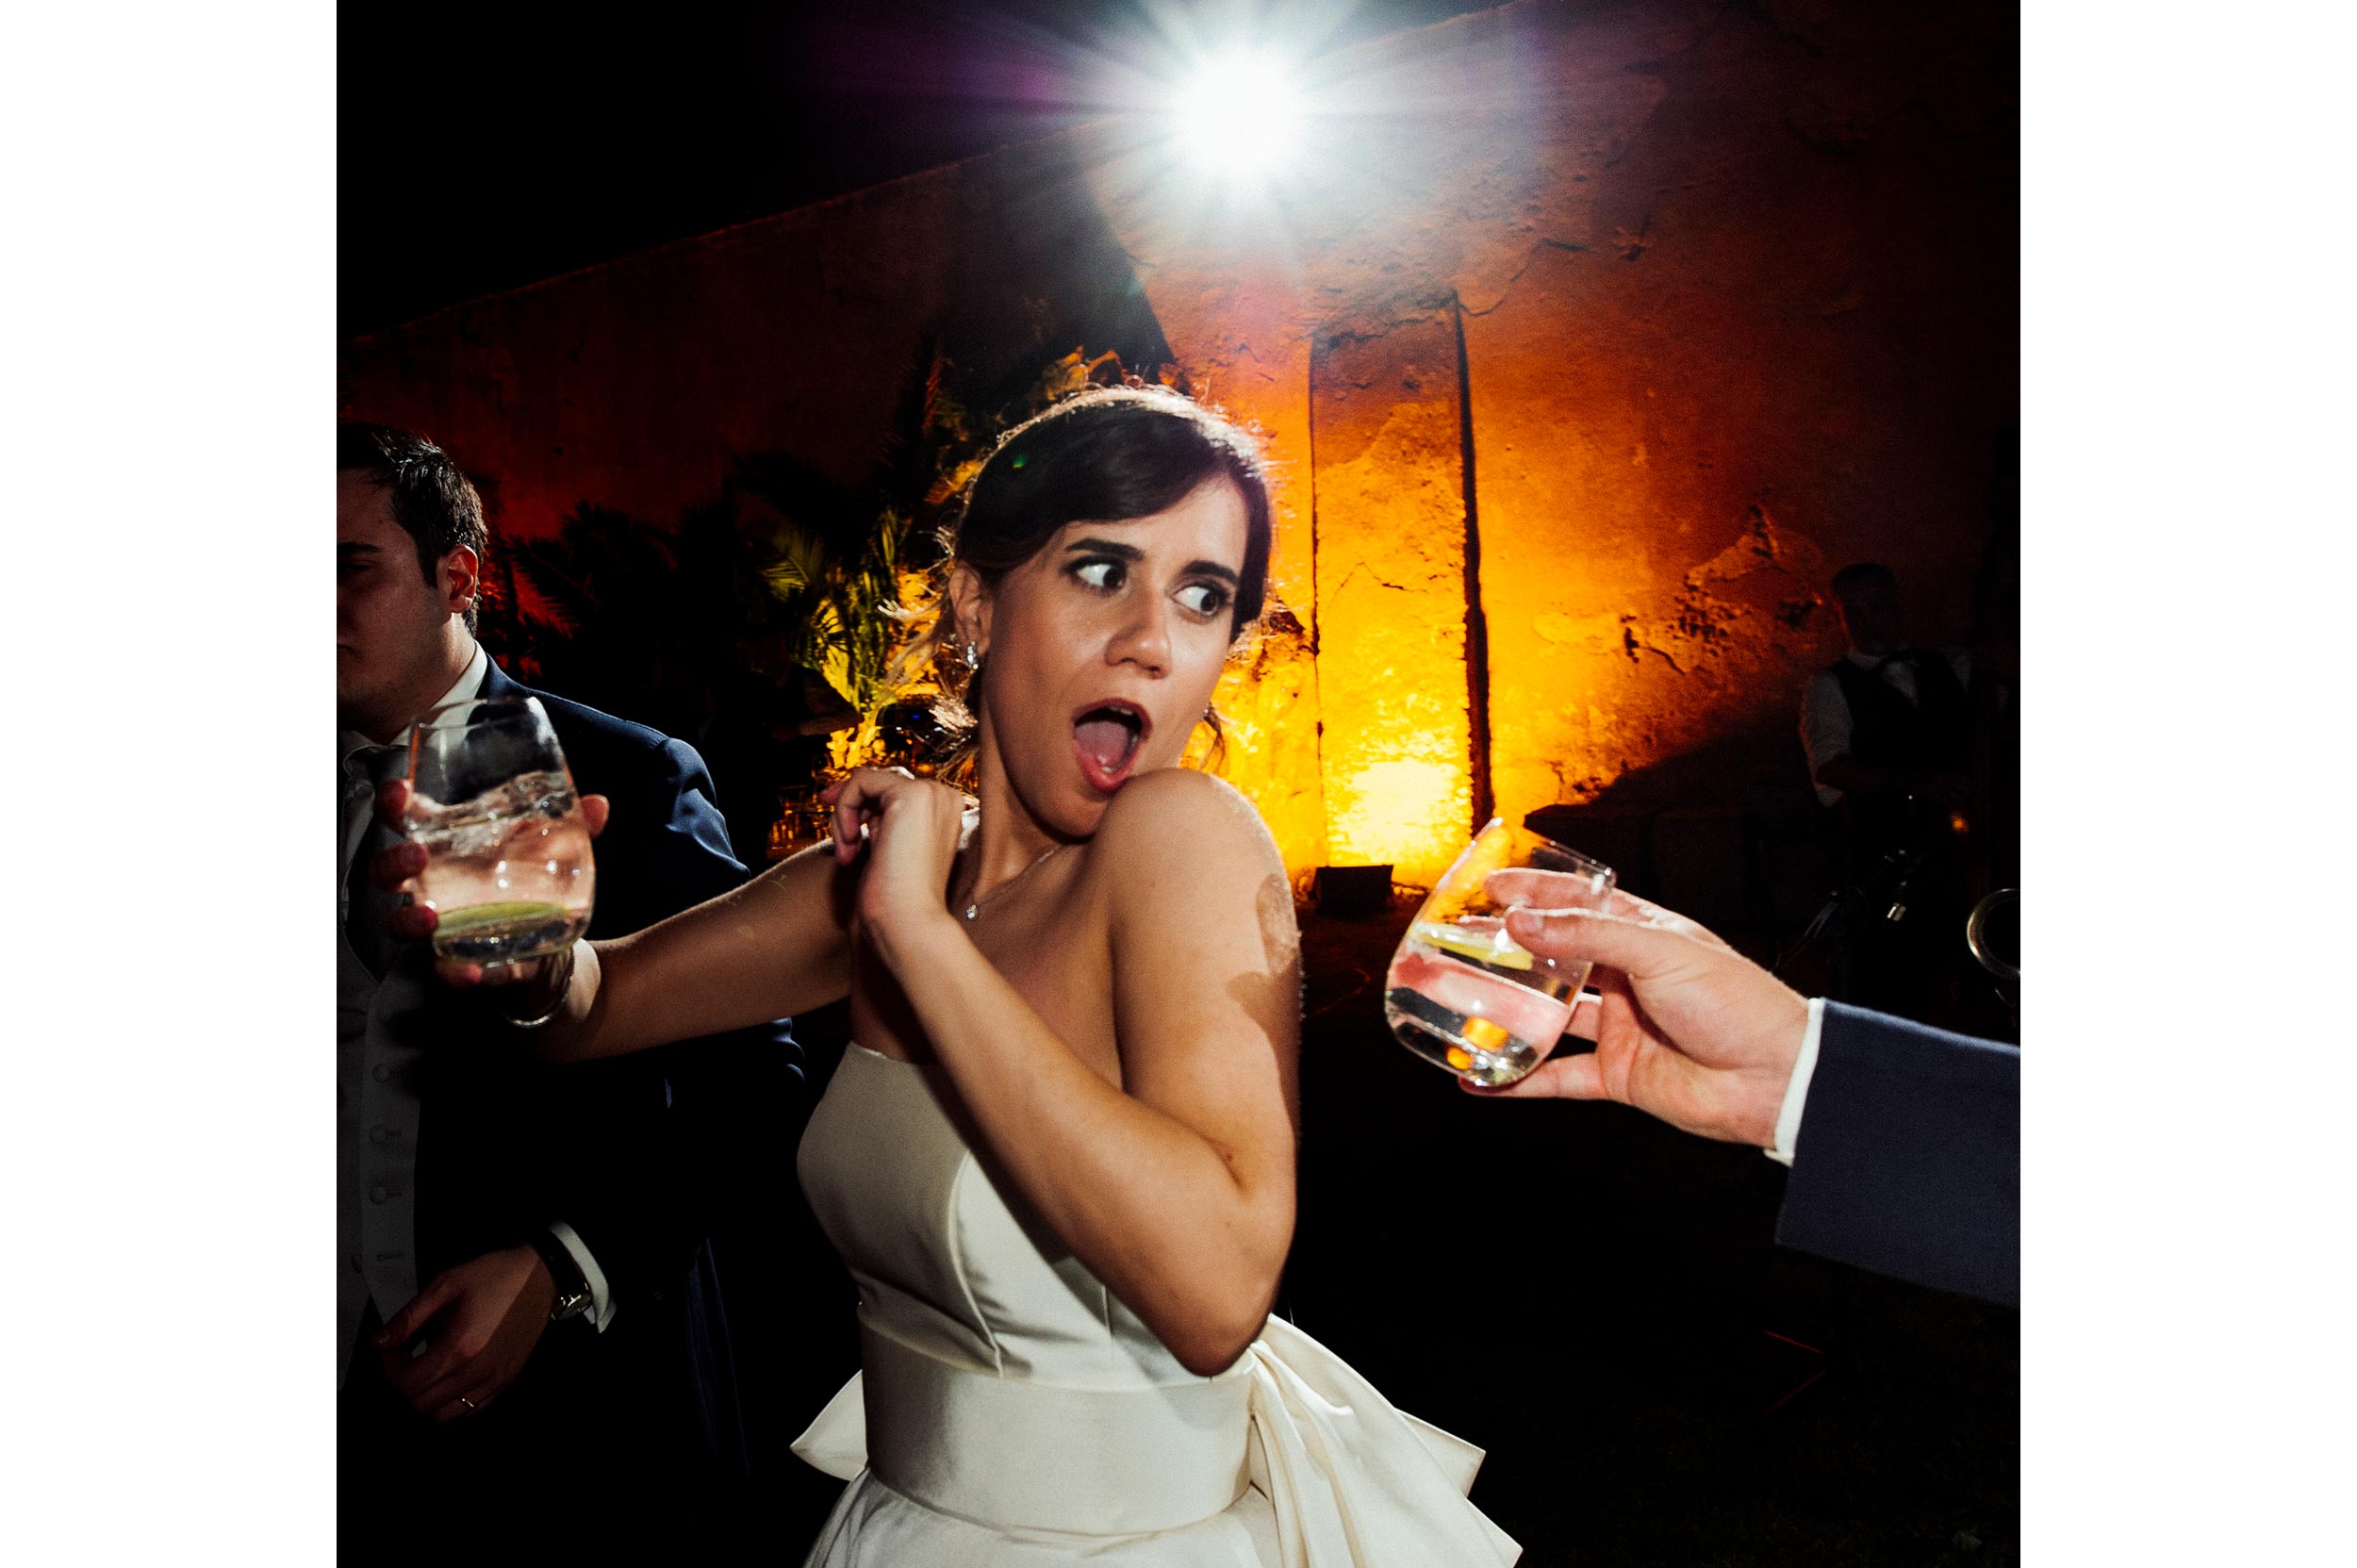 Bride refusig water during wedding party candid wedding photography by Alessandro Avenali